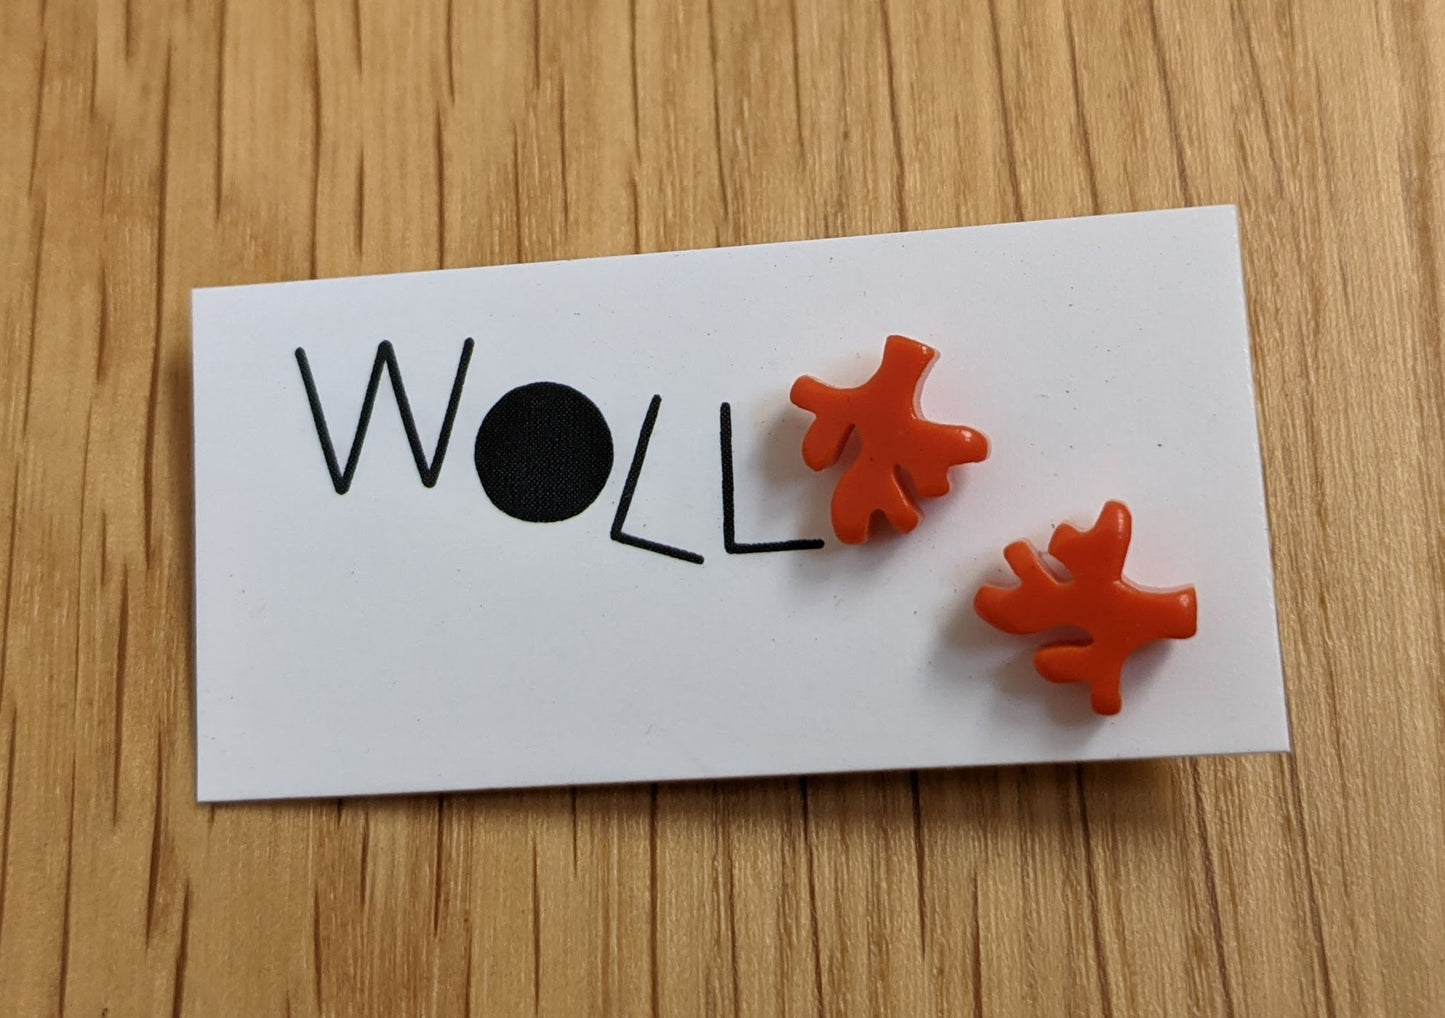 Mini coral stud earrings by Woll Jewelry